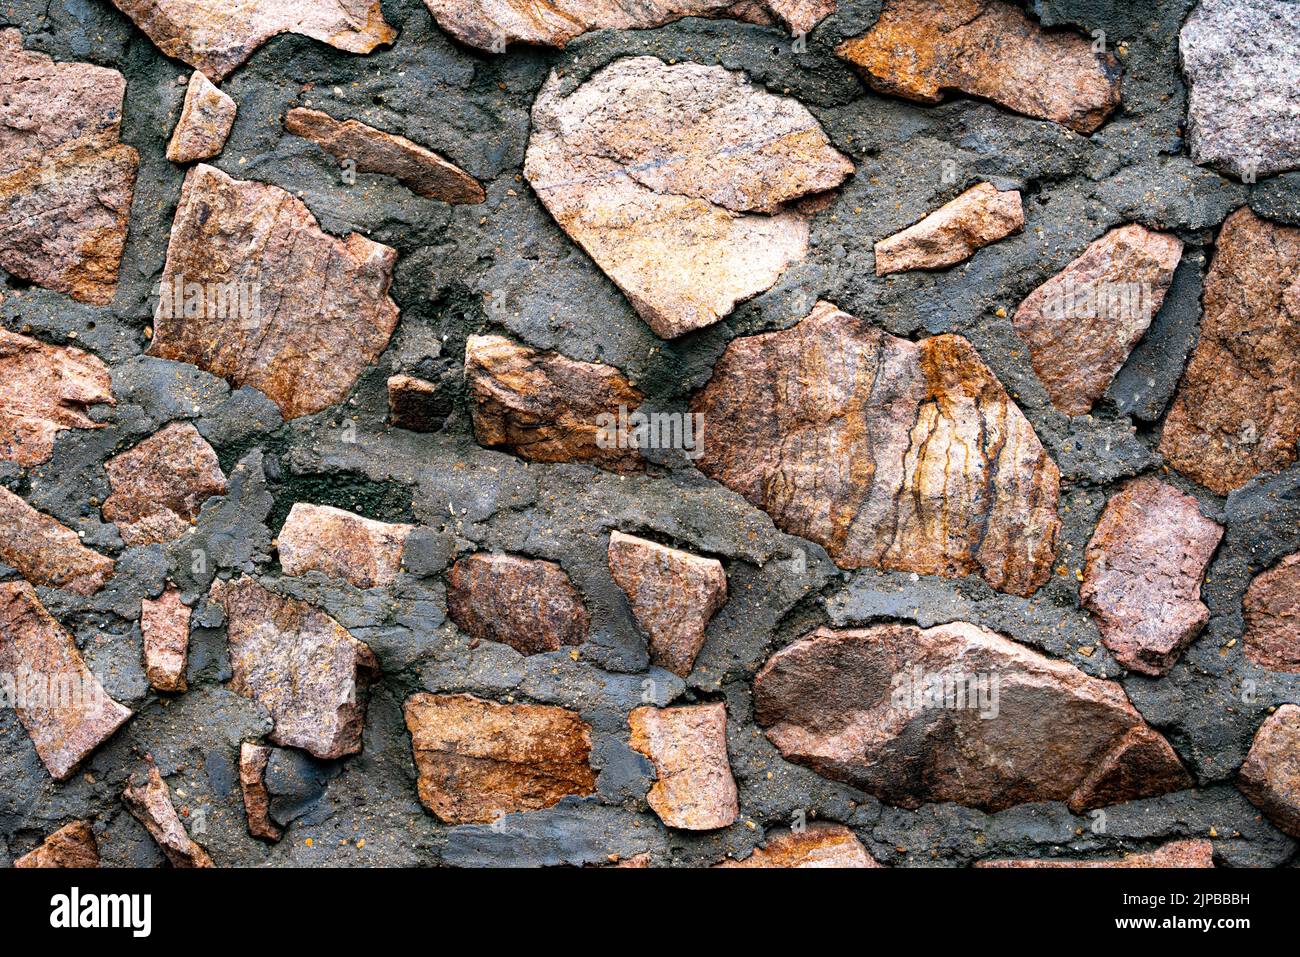 natural rock stones wall texture surface background Stock Photo